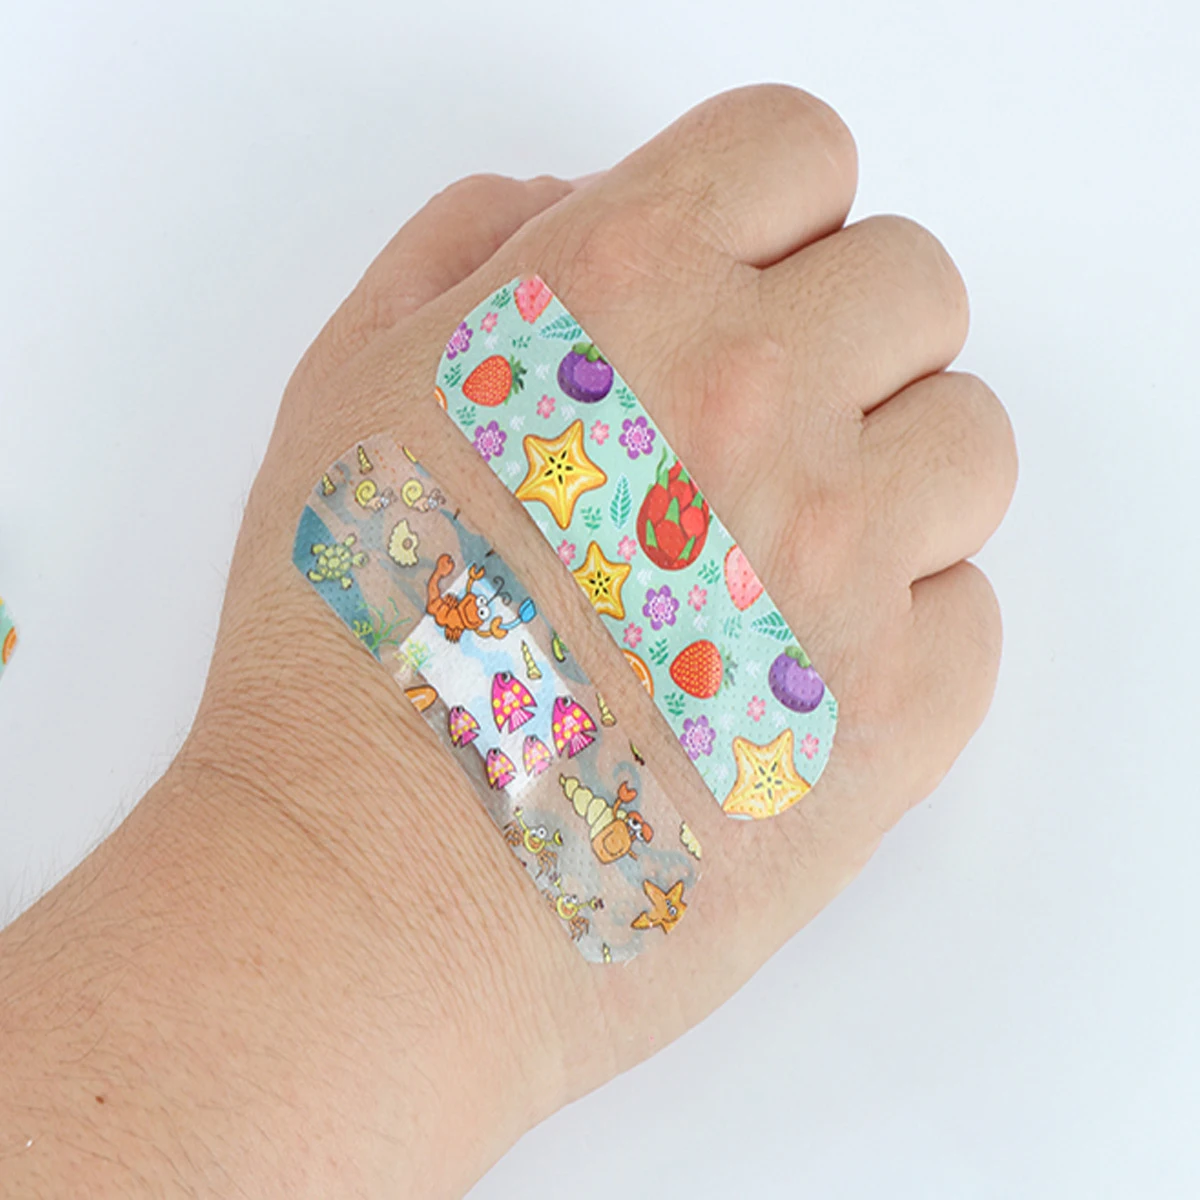 

100pcs/lot Cute Patterned Healing Patches Curved Wound Strips Adhesive Plasters Waterproof Bandages Kids First Aid for Children